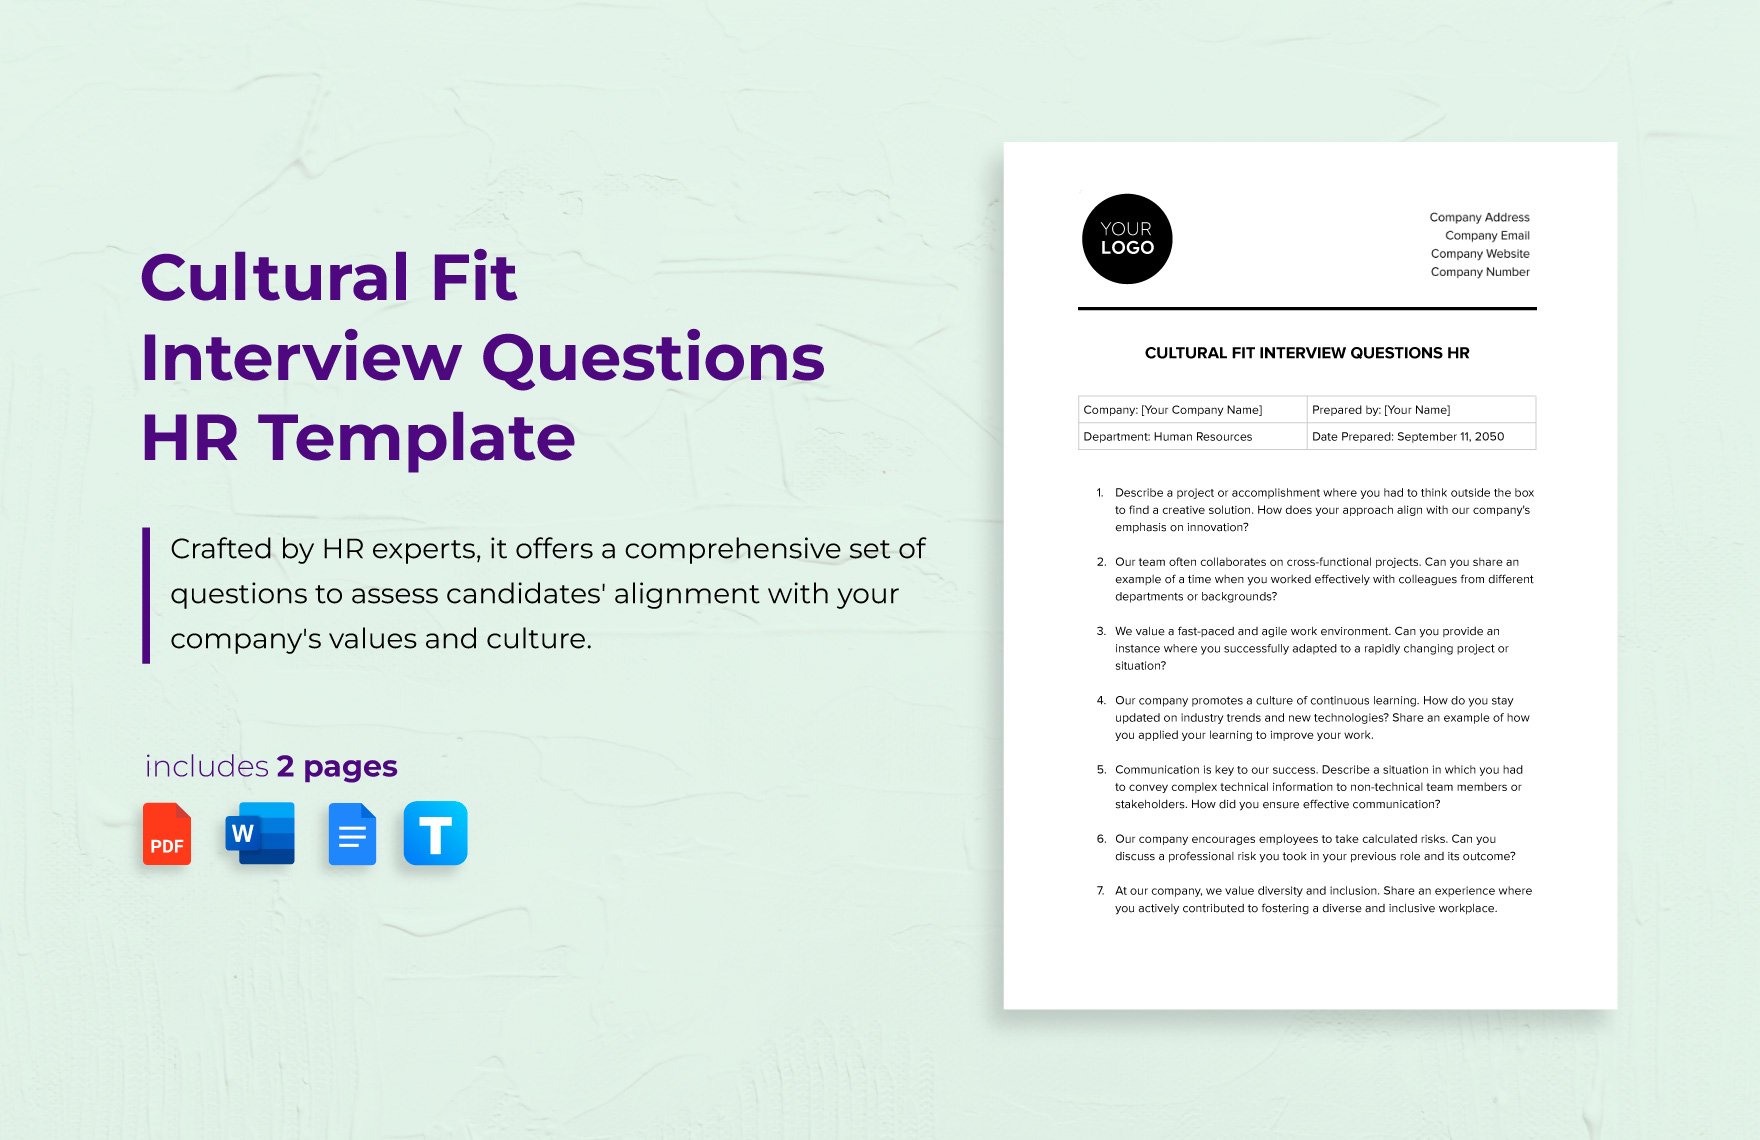 Cultural Fit Interview Questions HR Template in Word, Google Docs, PDF